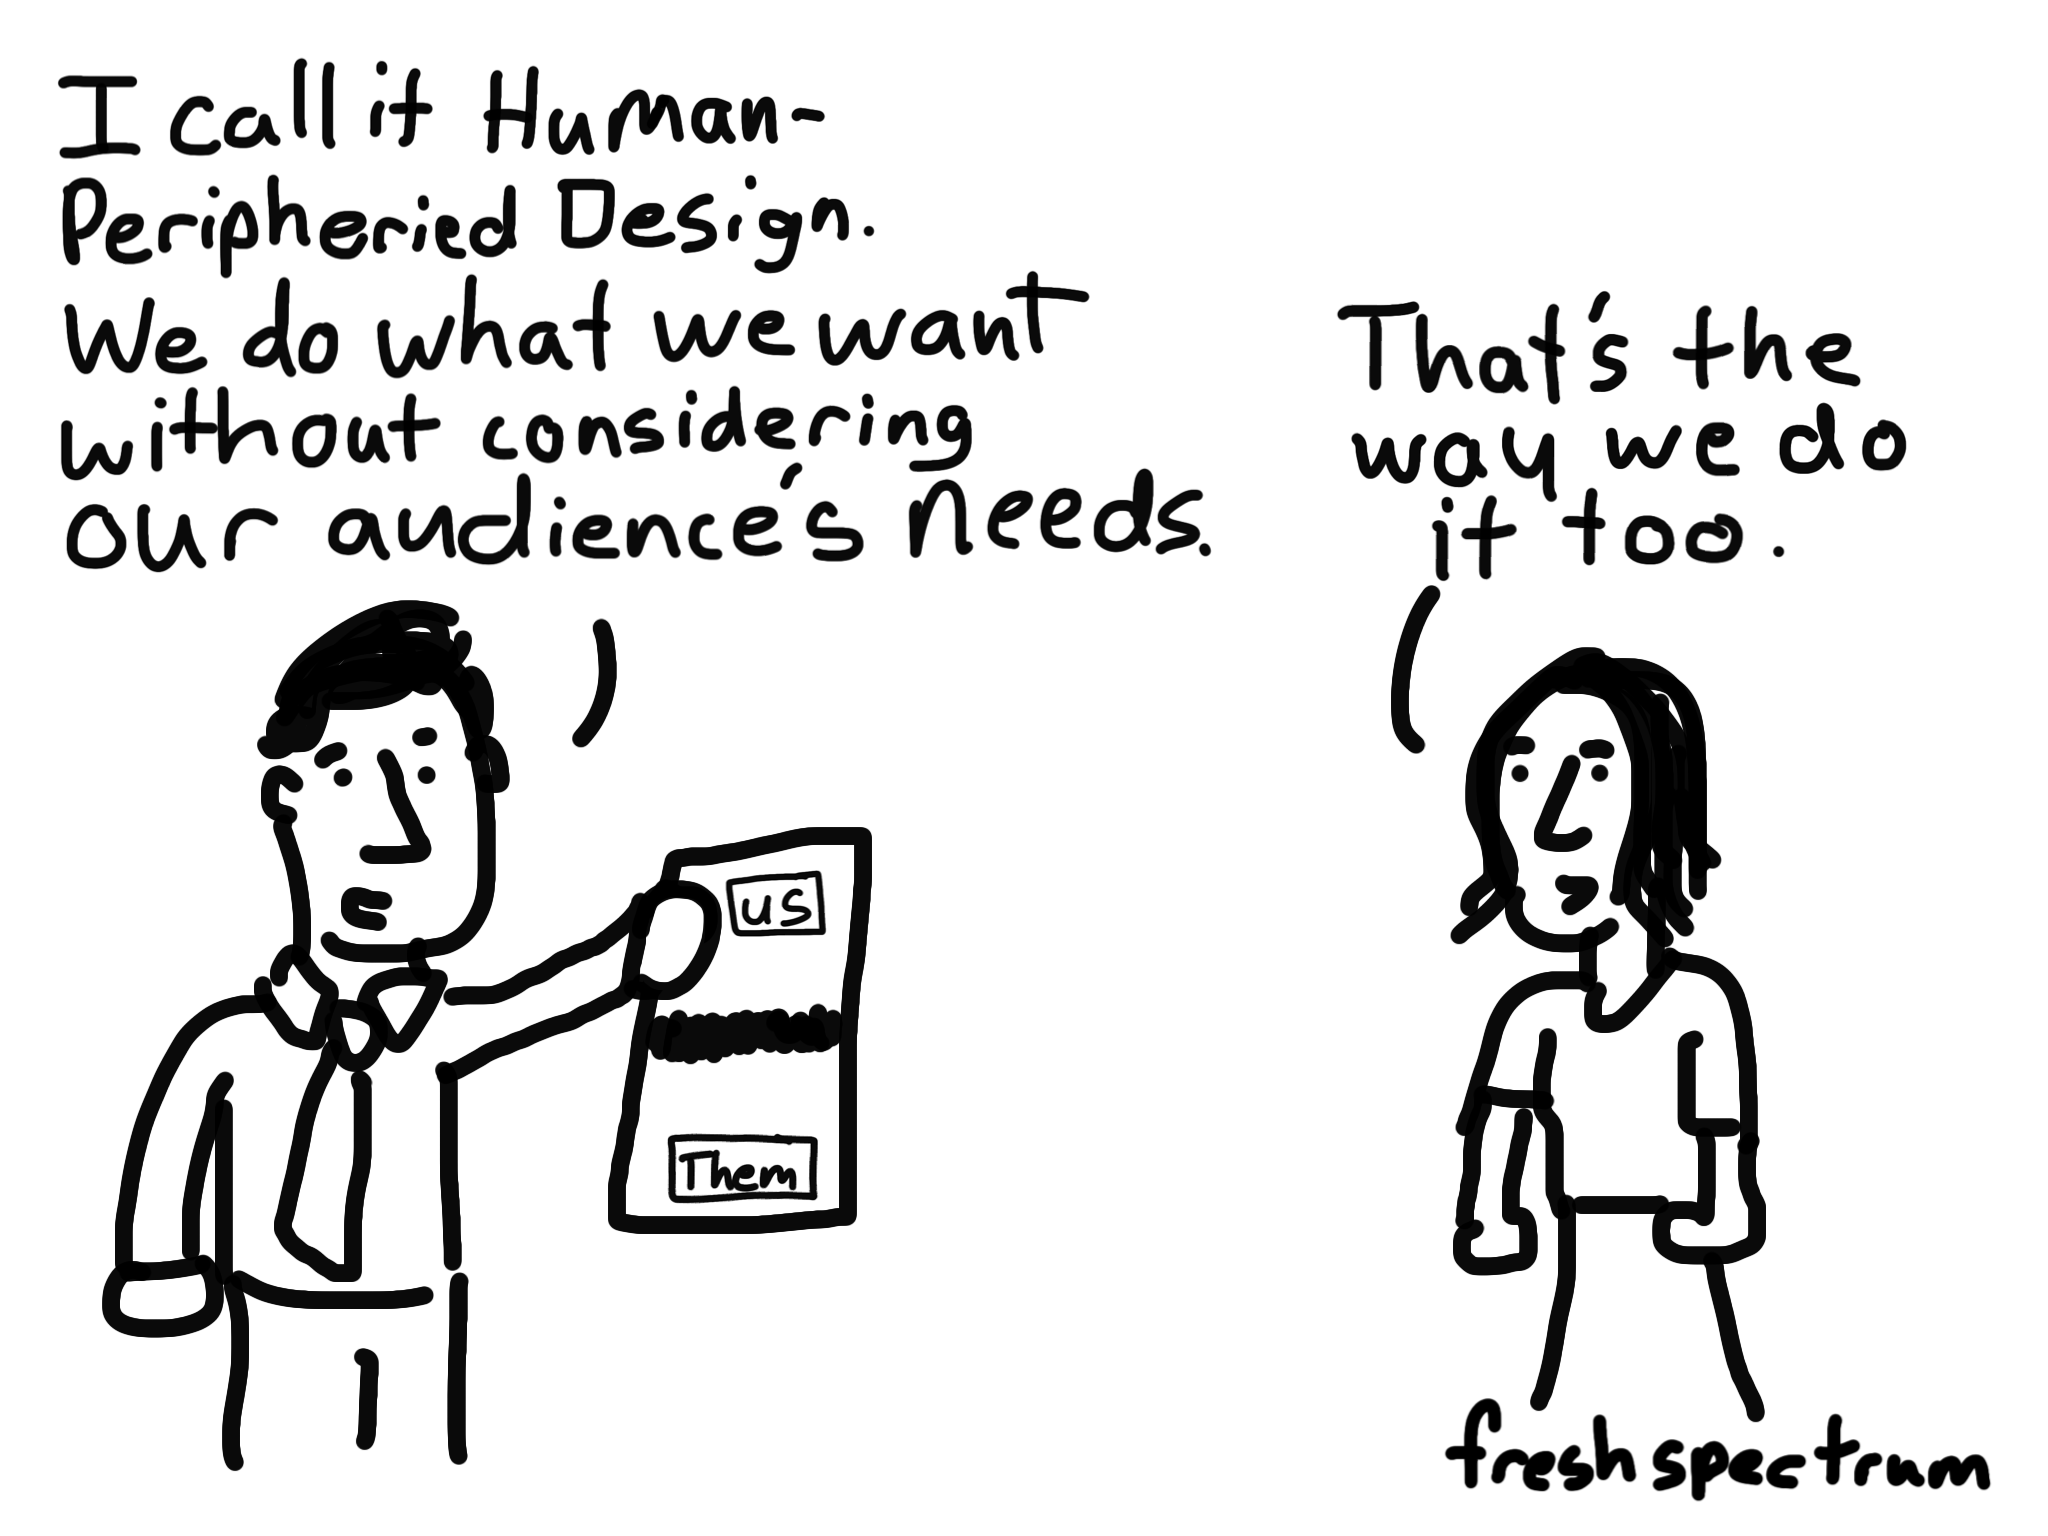 Cartoon-I call it human-peripheried design. We do what we want without considering our audience's needs...That's the way we do it too.